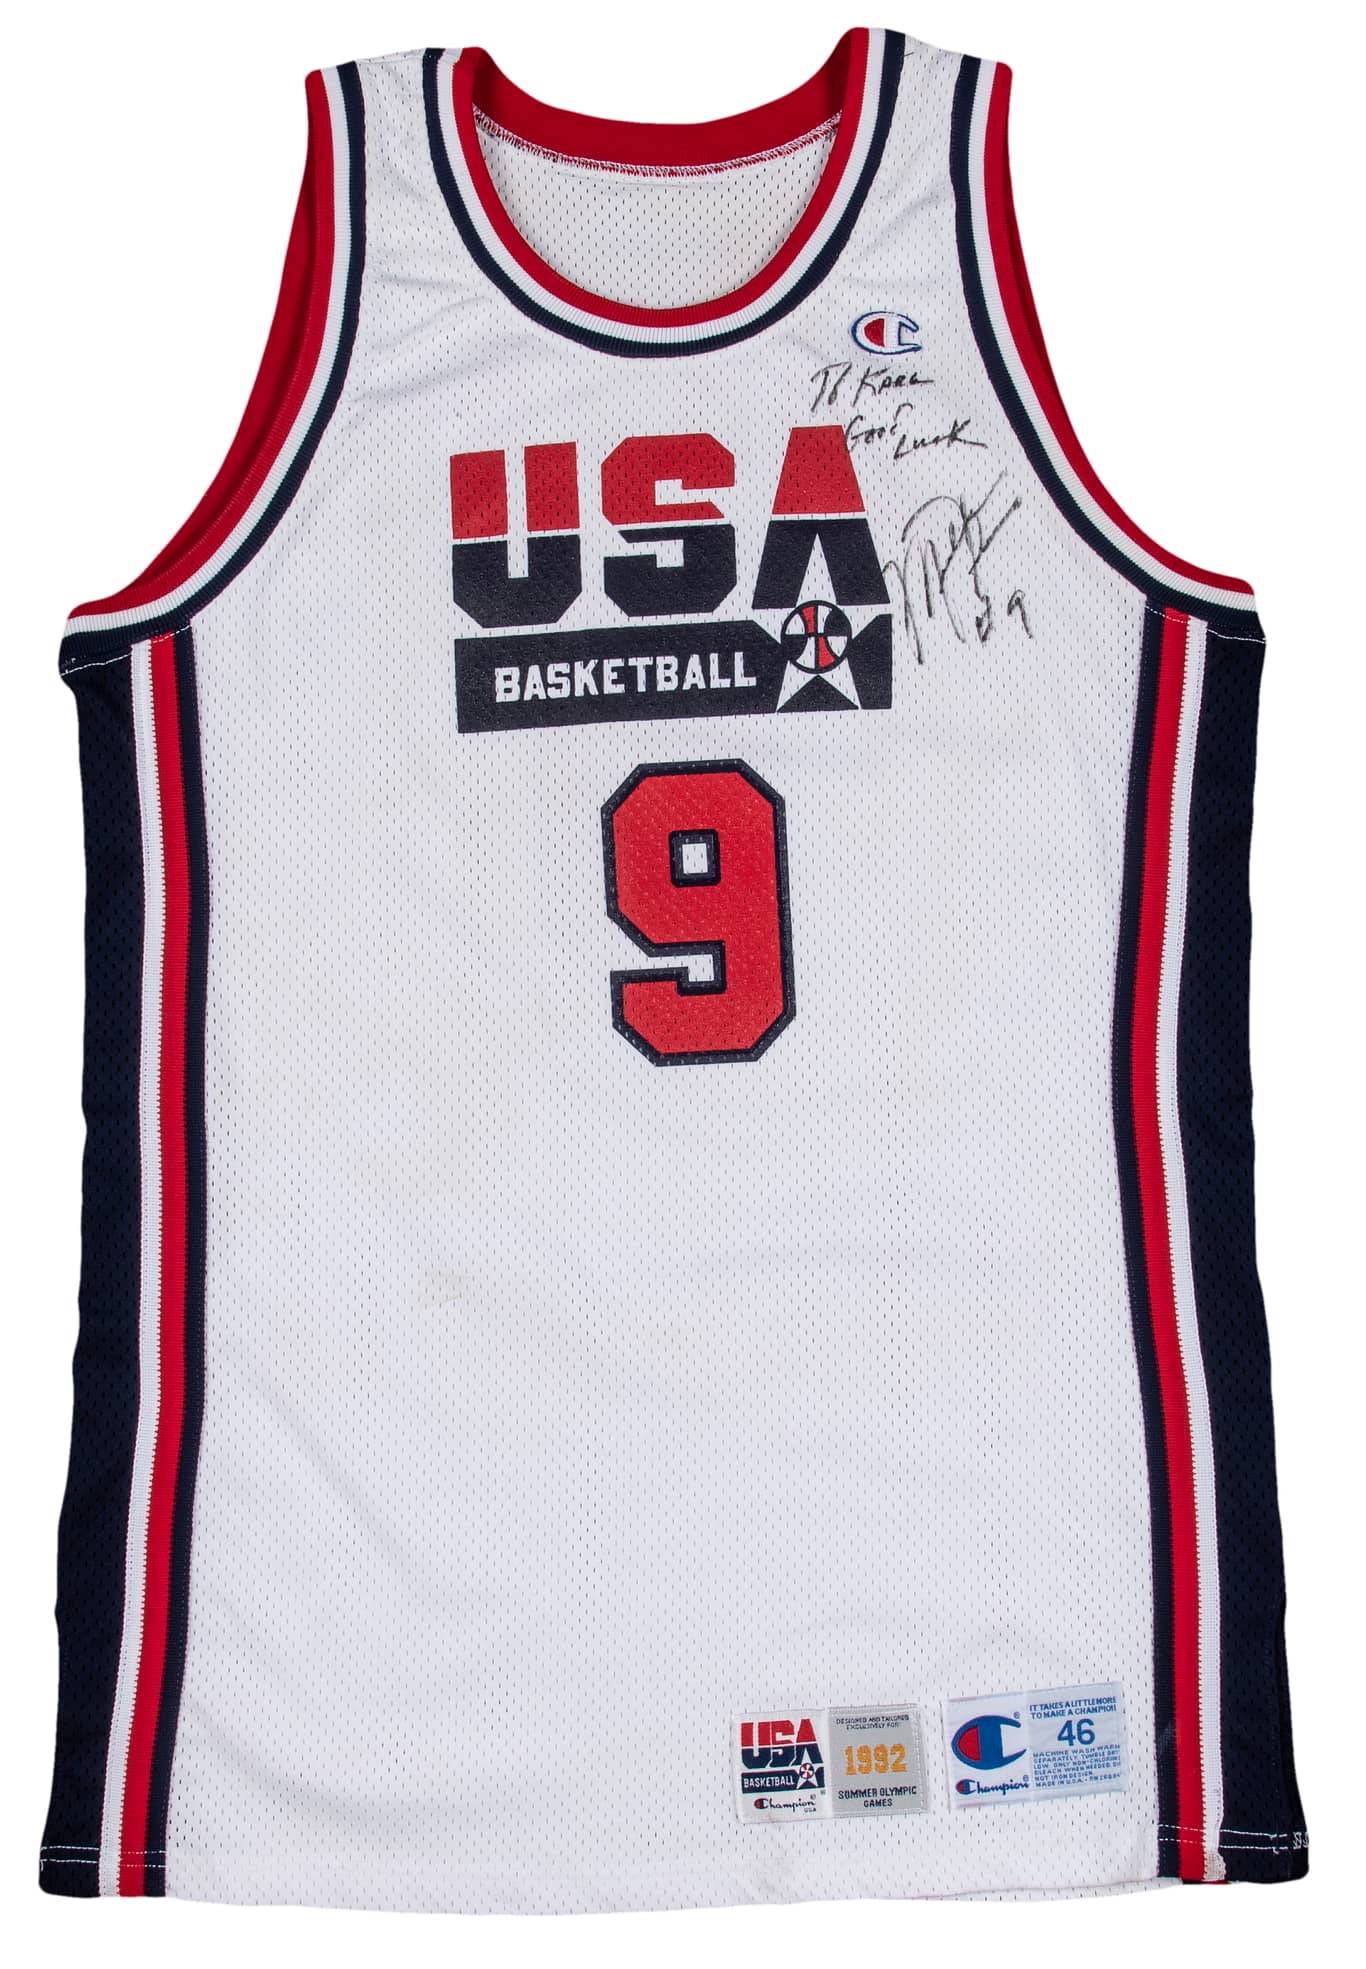 The signed front of the valuable Olympic jersey